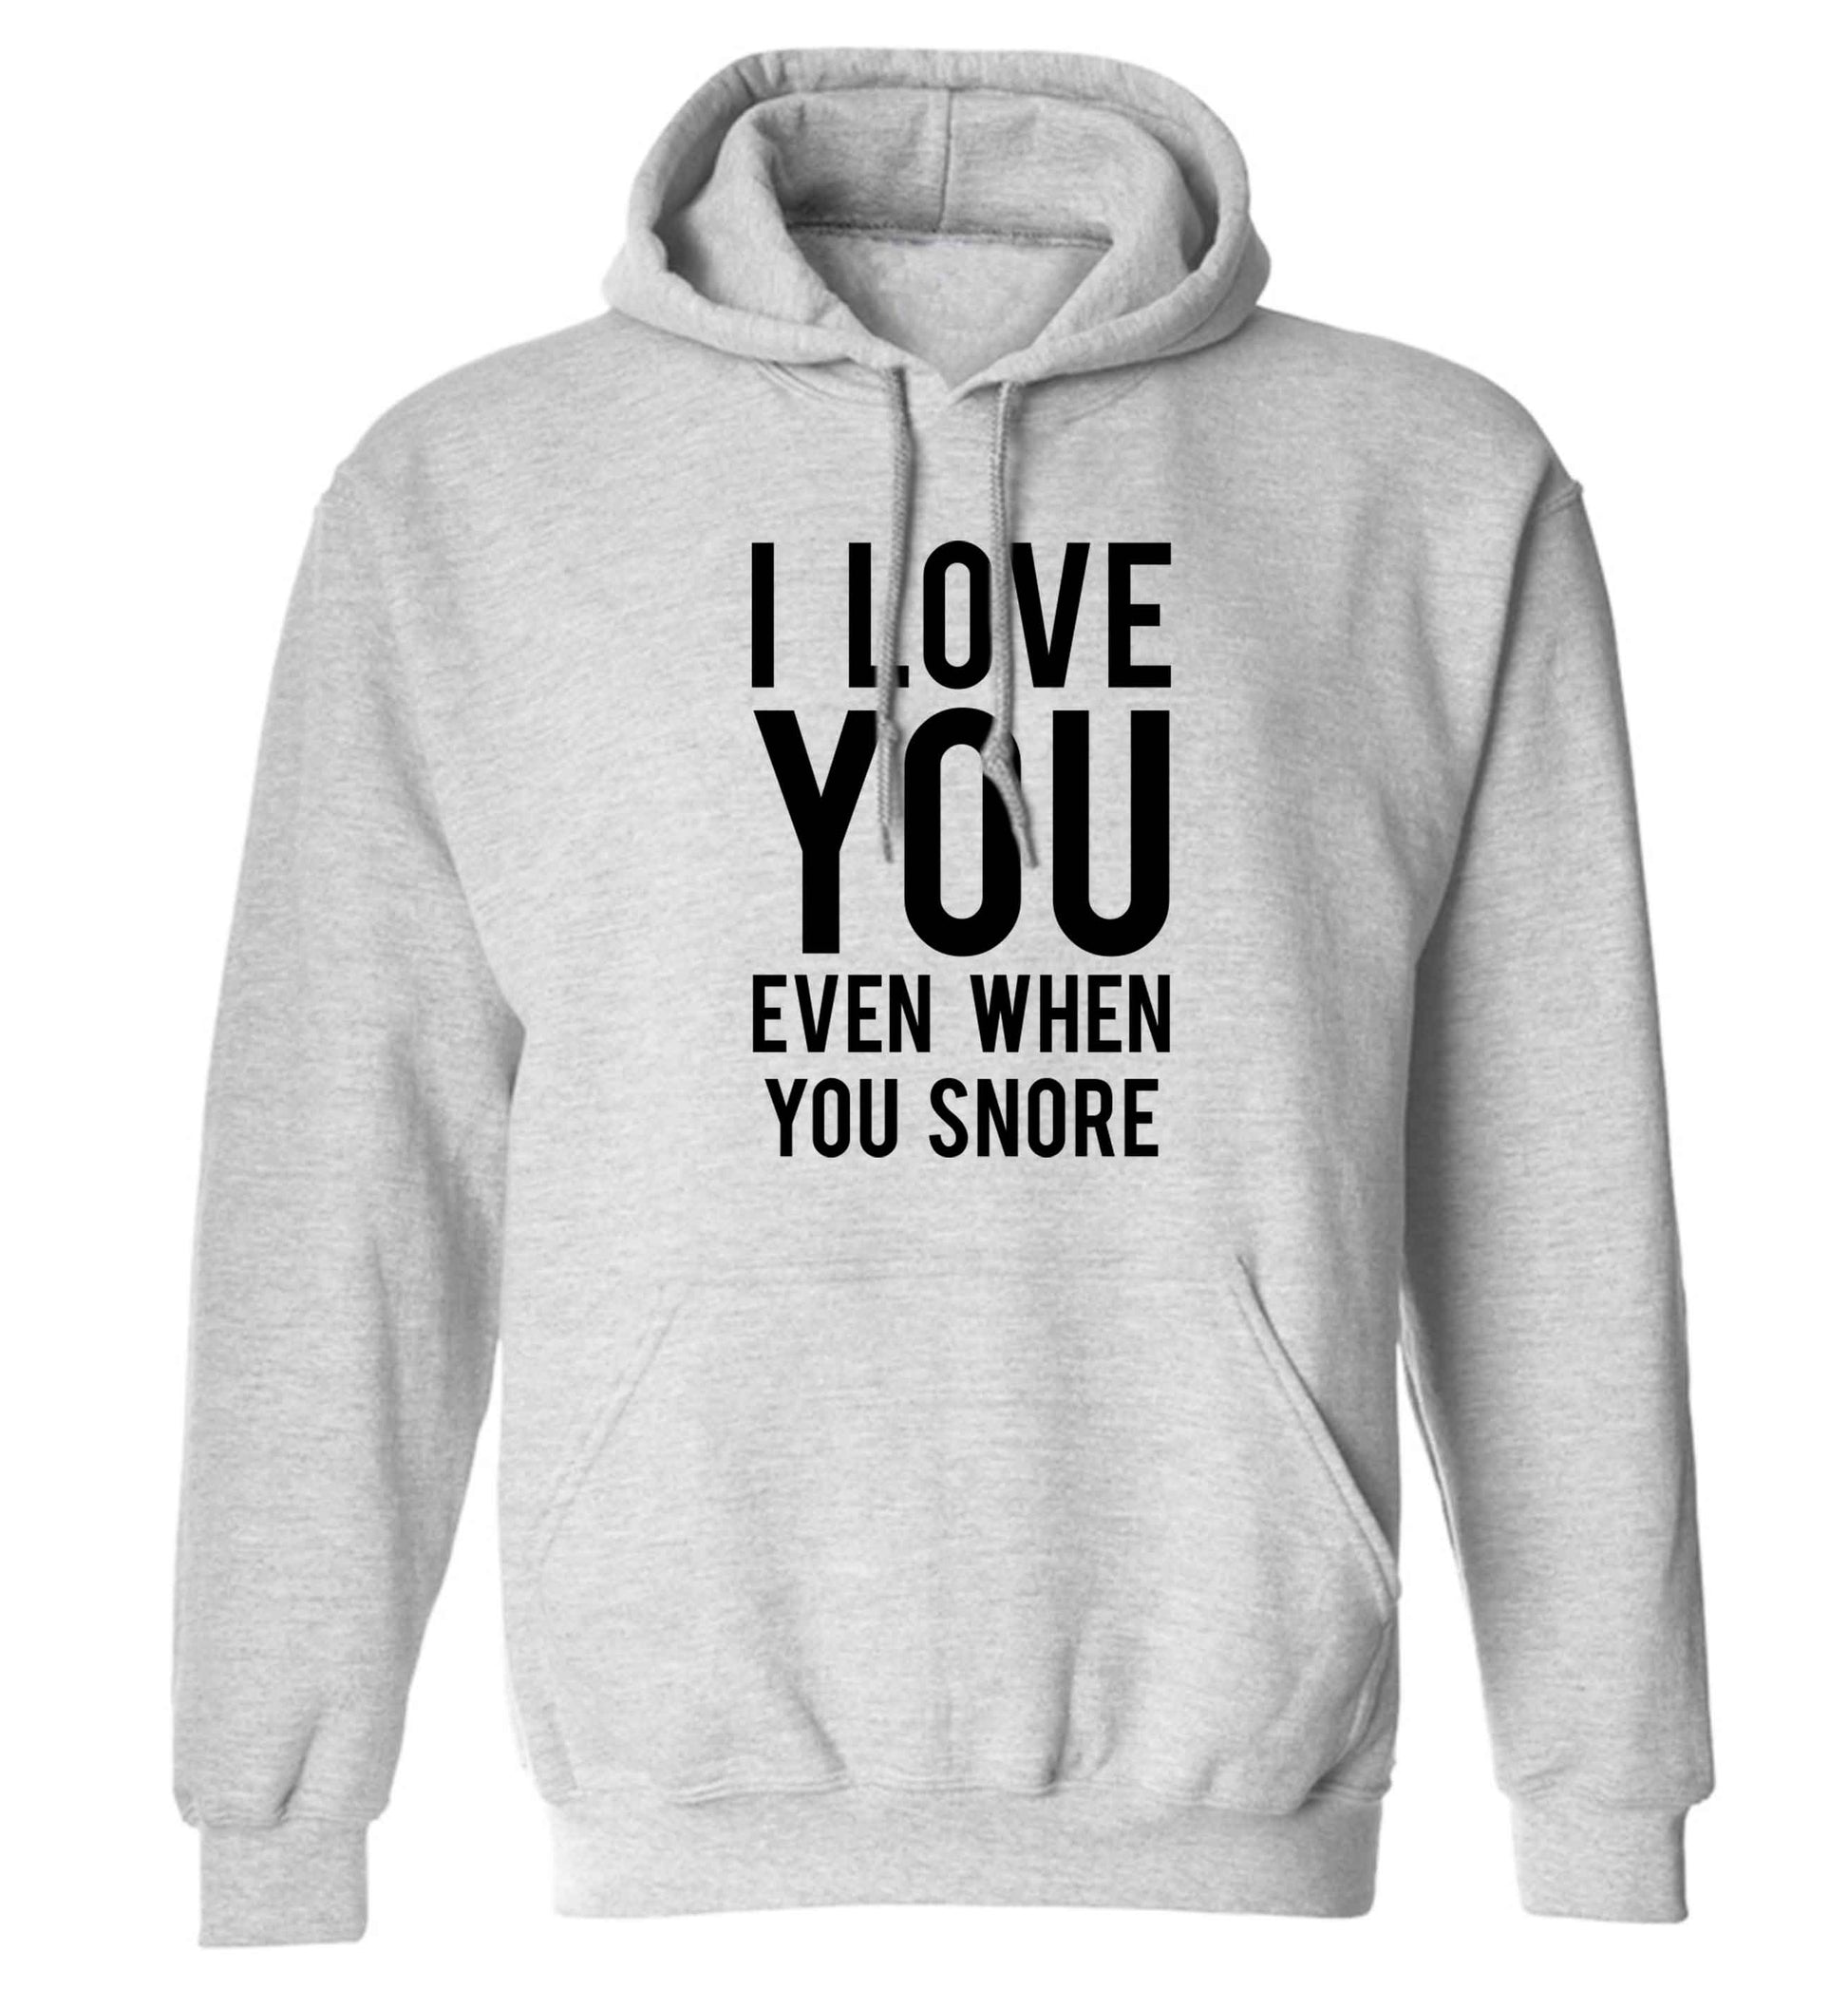 I love you even when you snore adults unisex grey hoodie 2XL